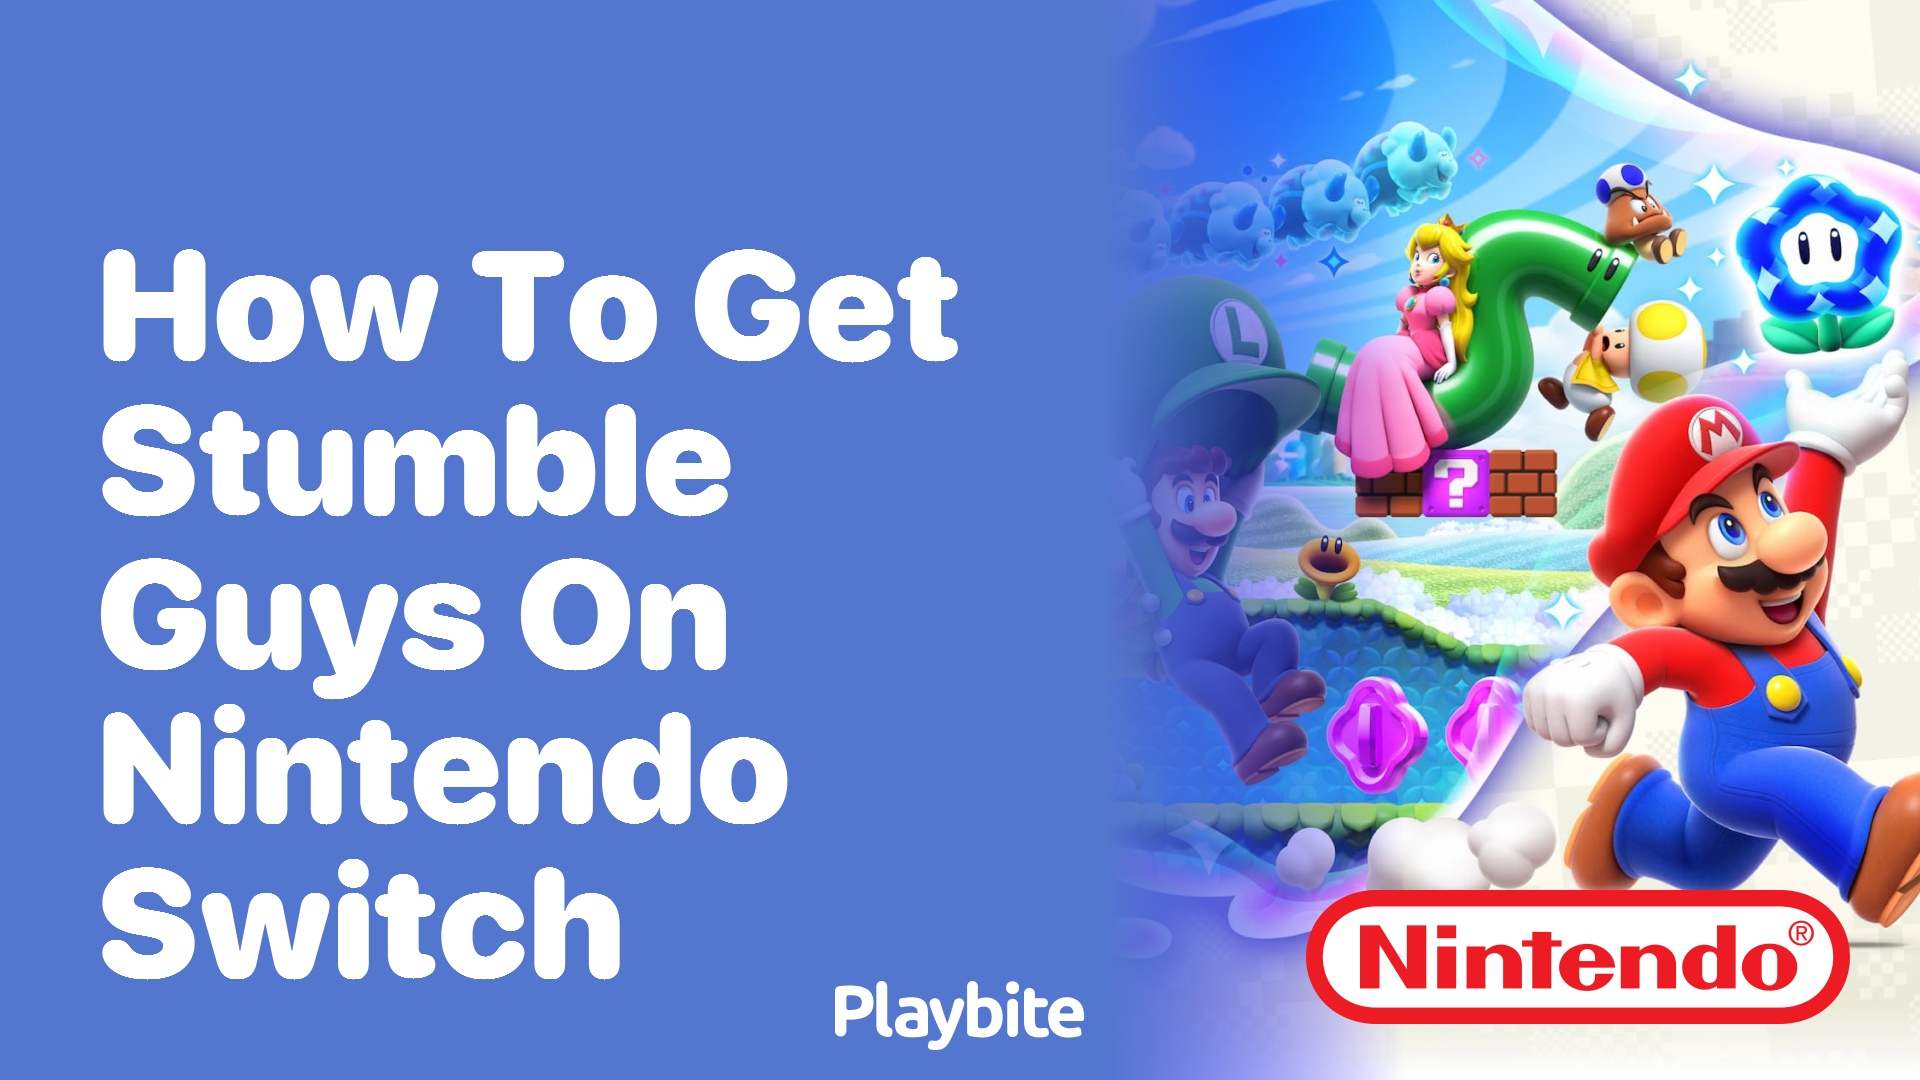 How to Get Stumble Guys on Nintendo Switch: A Quick Guide